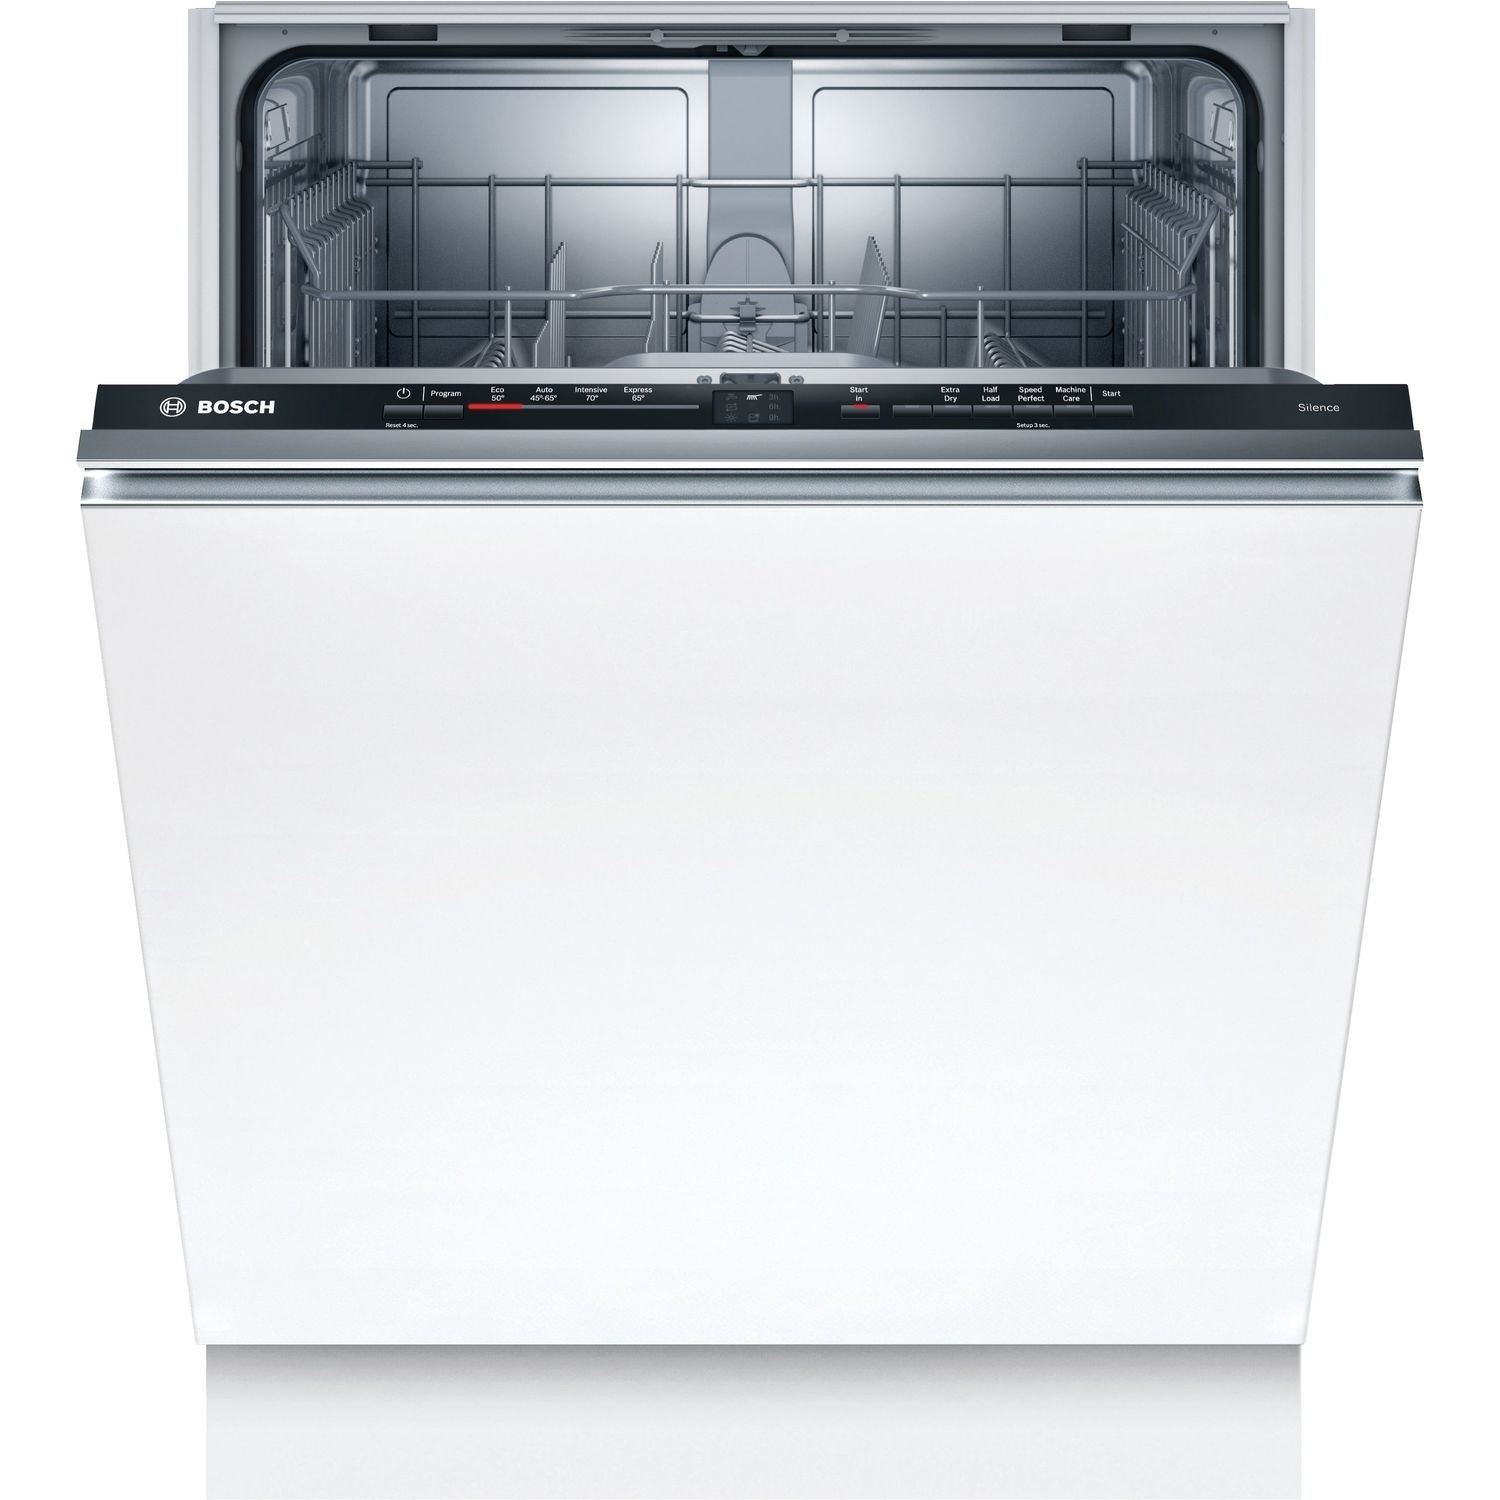 Refurbished Bosch Serie 2 SGV2ITX22G 12 Place Fully Integrated Dishwasher